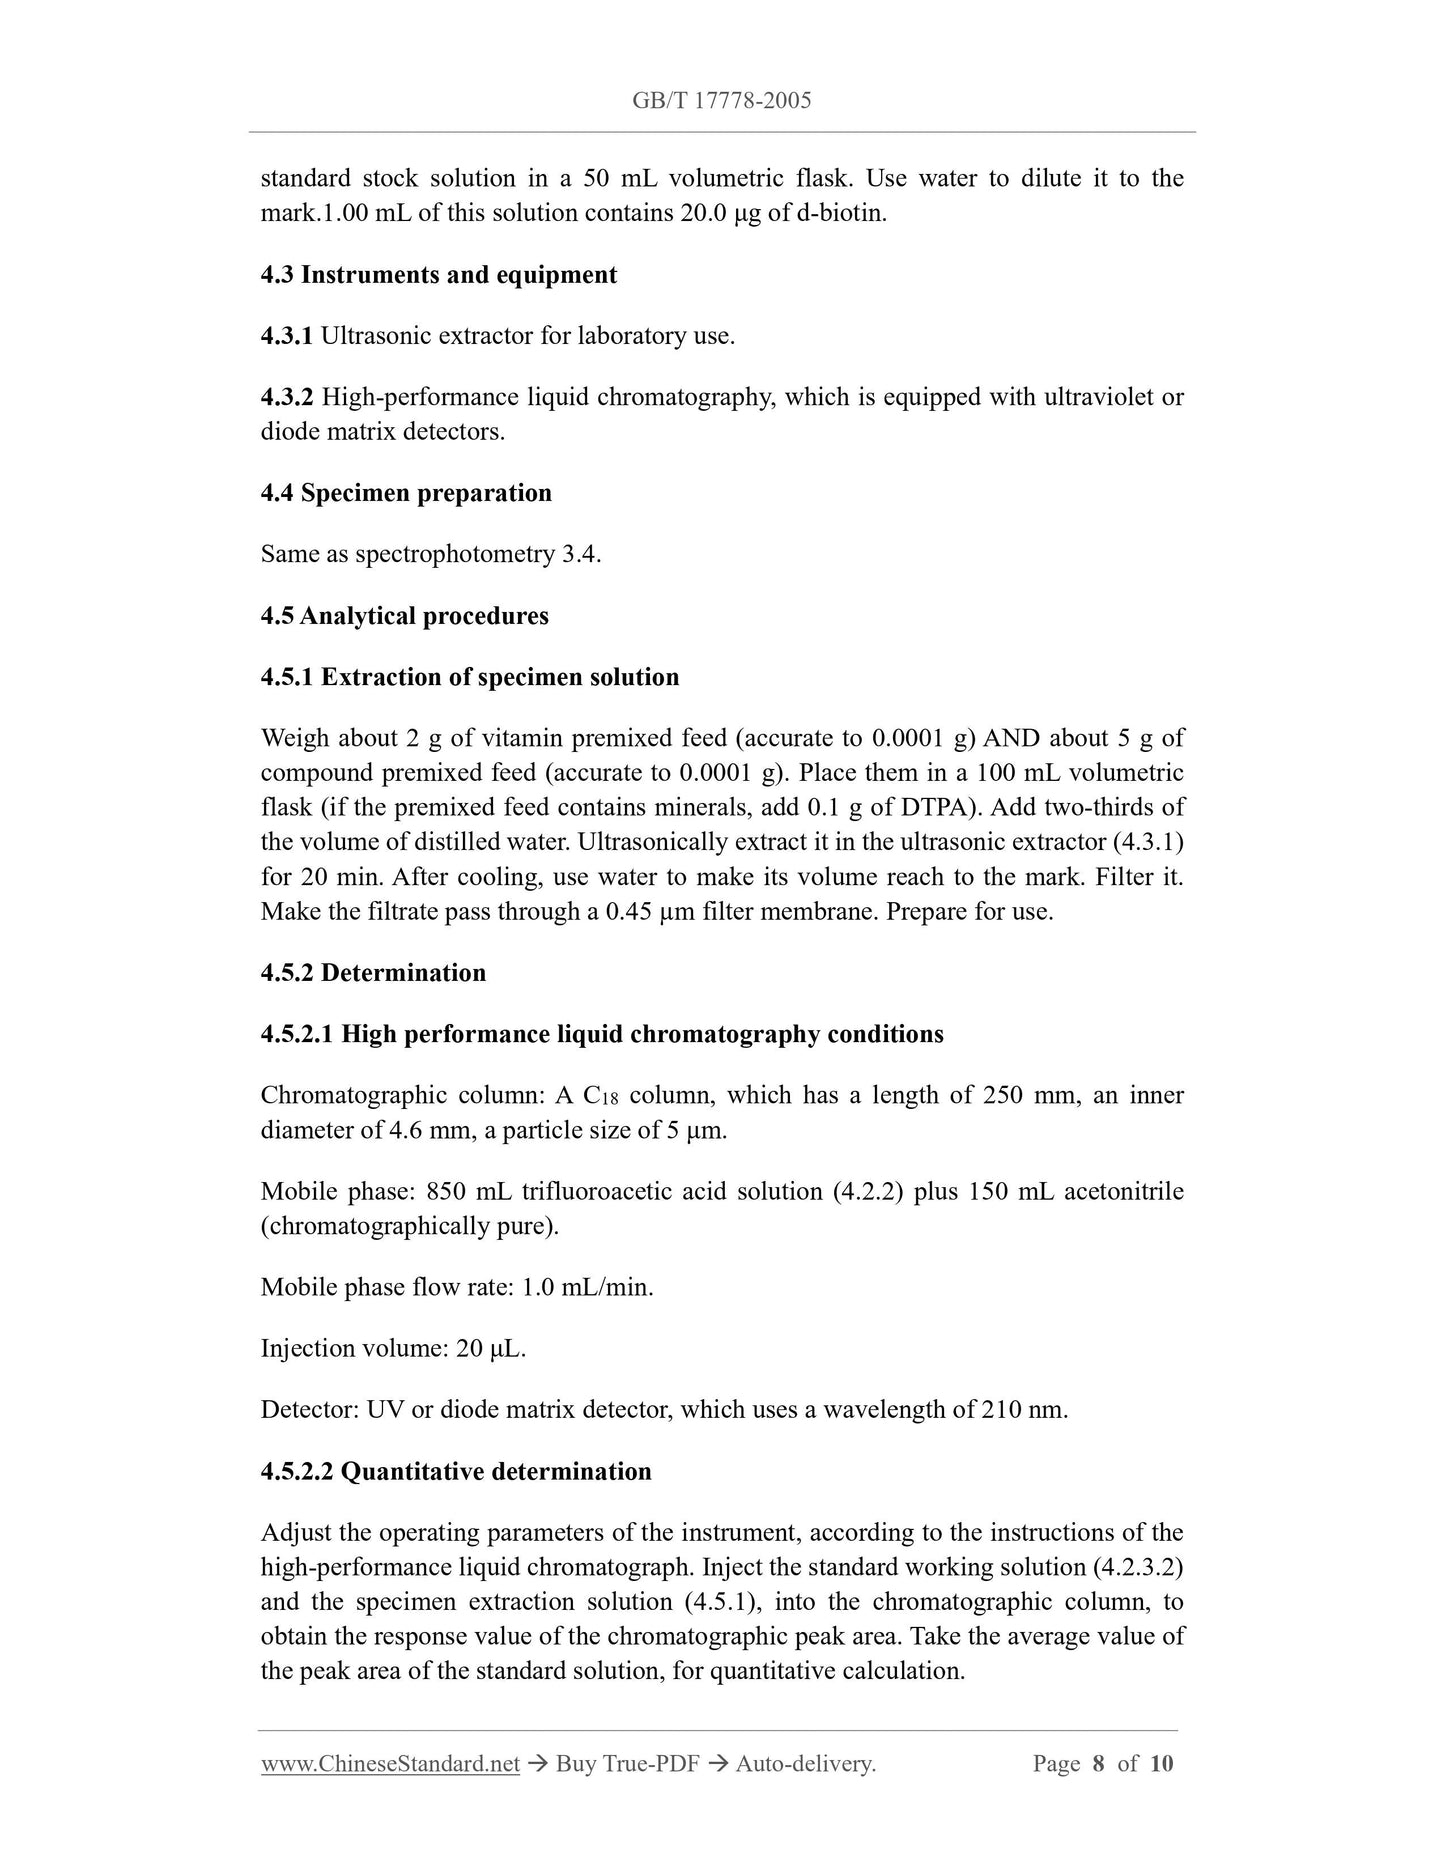 GB/T 17778-2005 Page 6